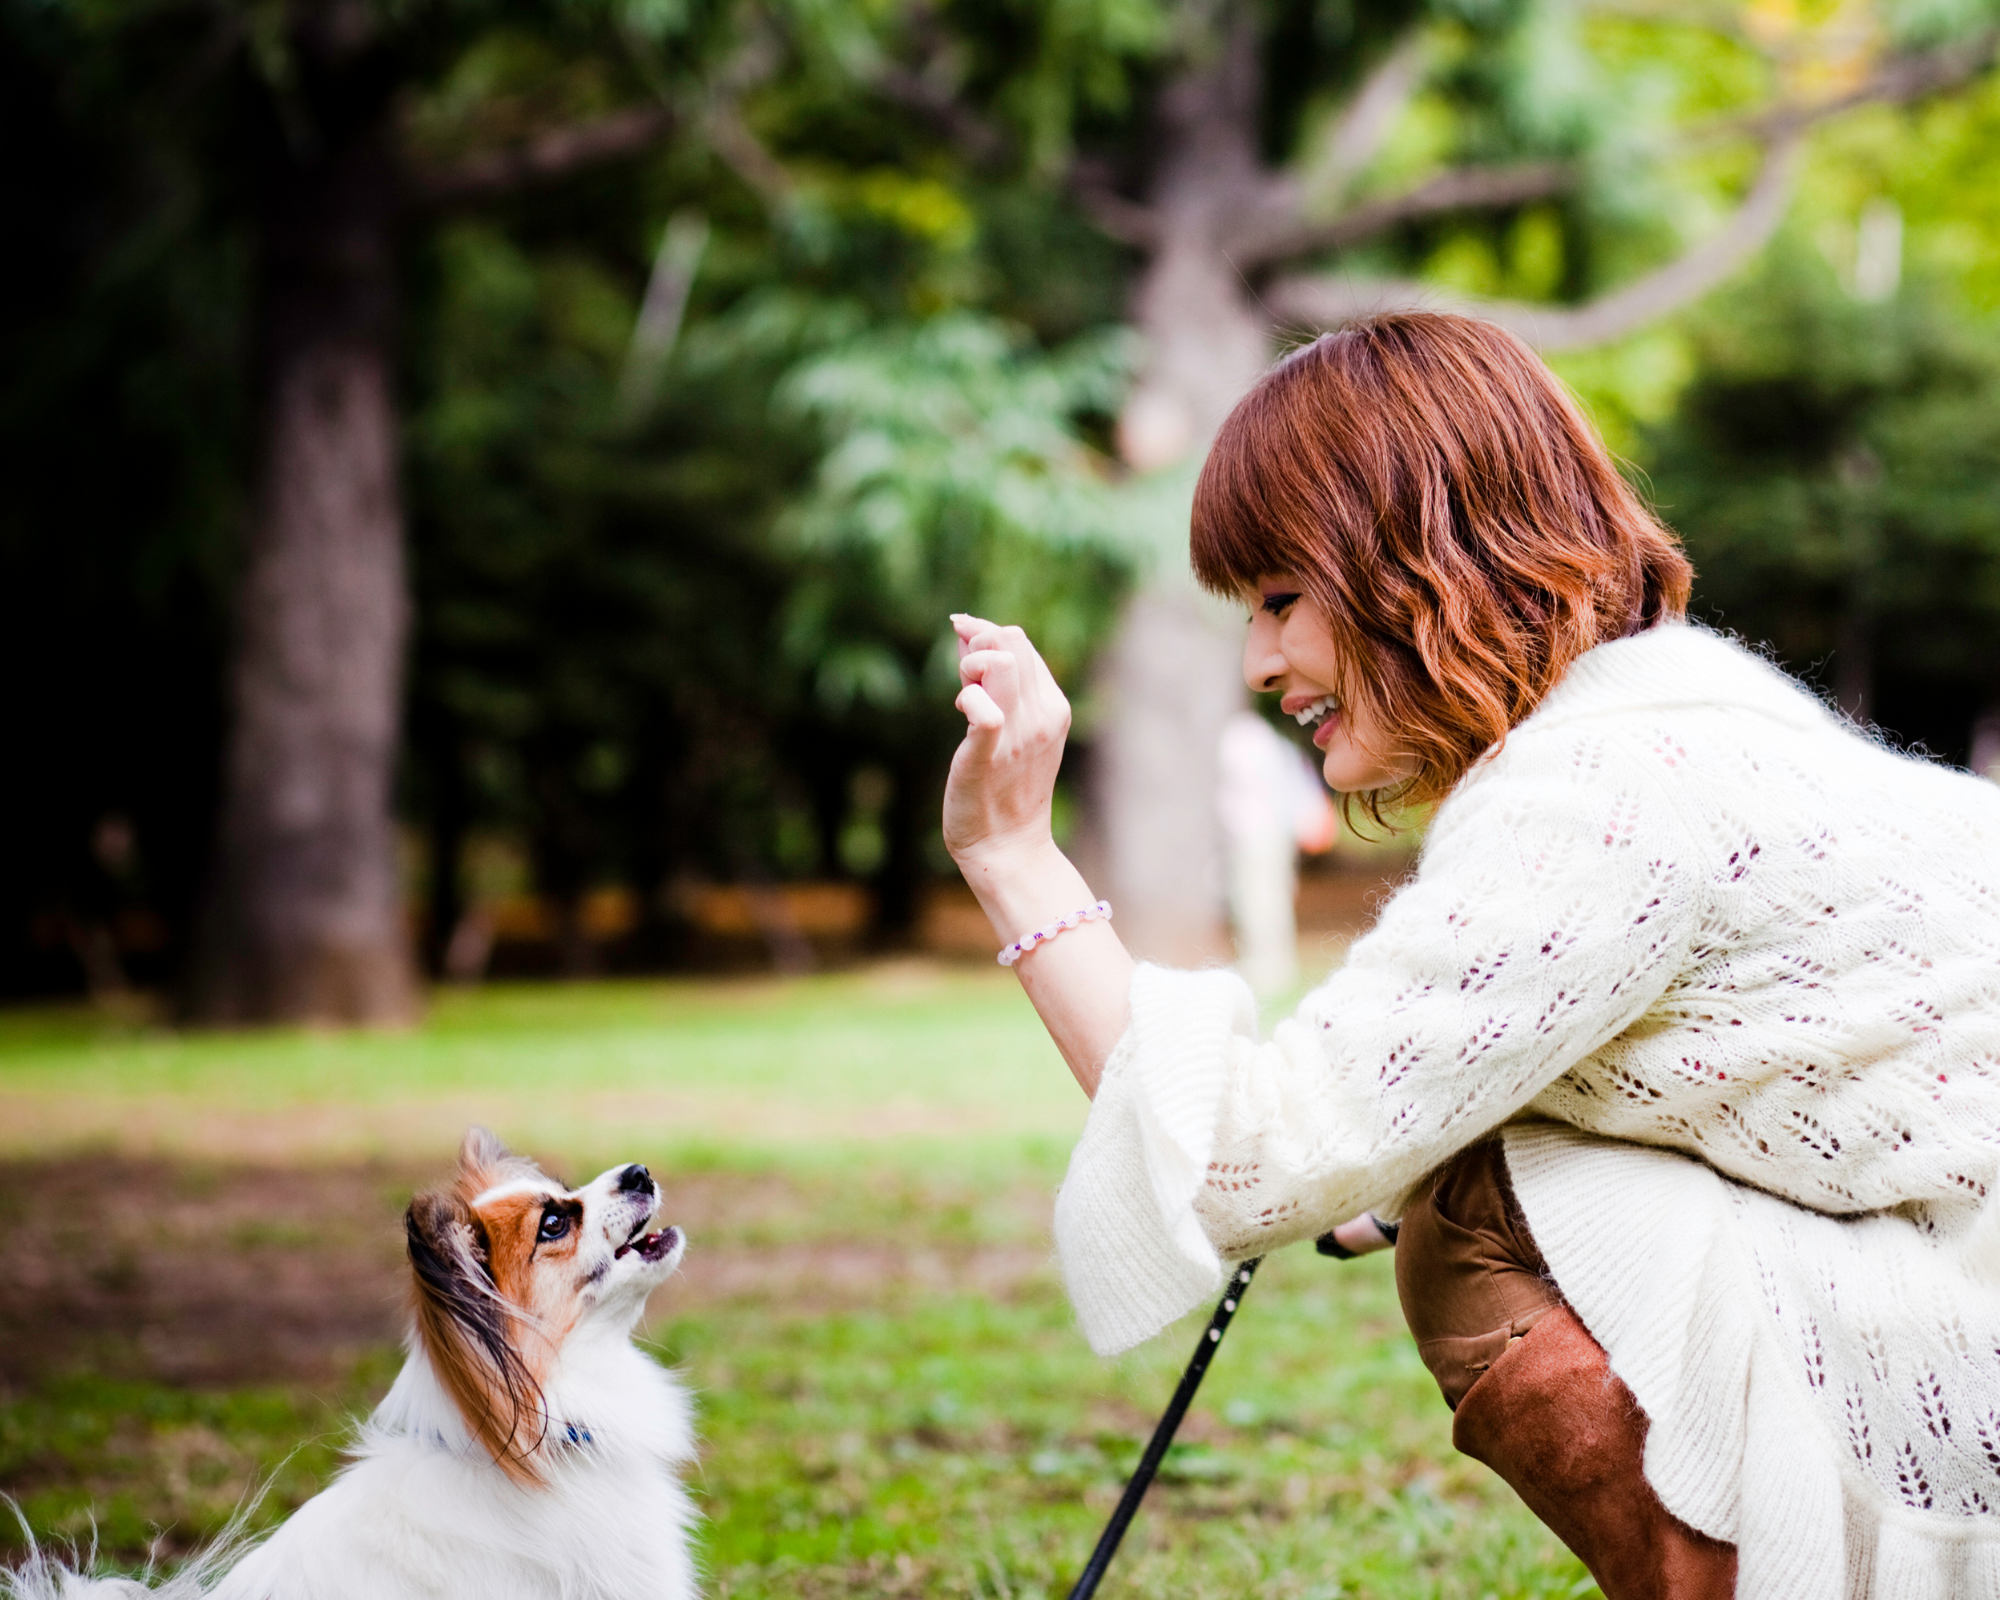 Red headed adult woman in cream sweater and skirt kneeling with treat to train Papillon dog on leash